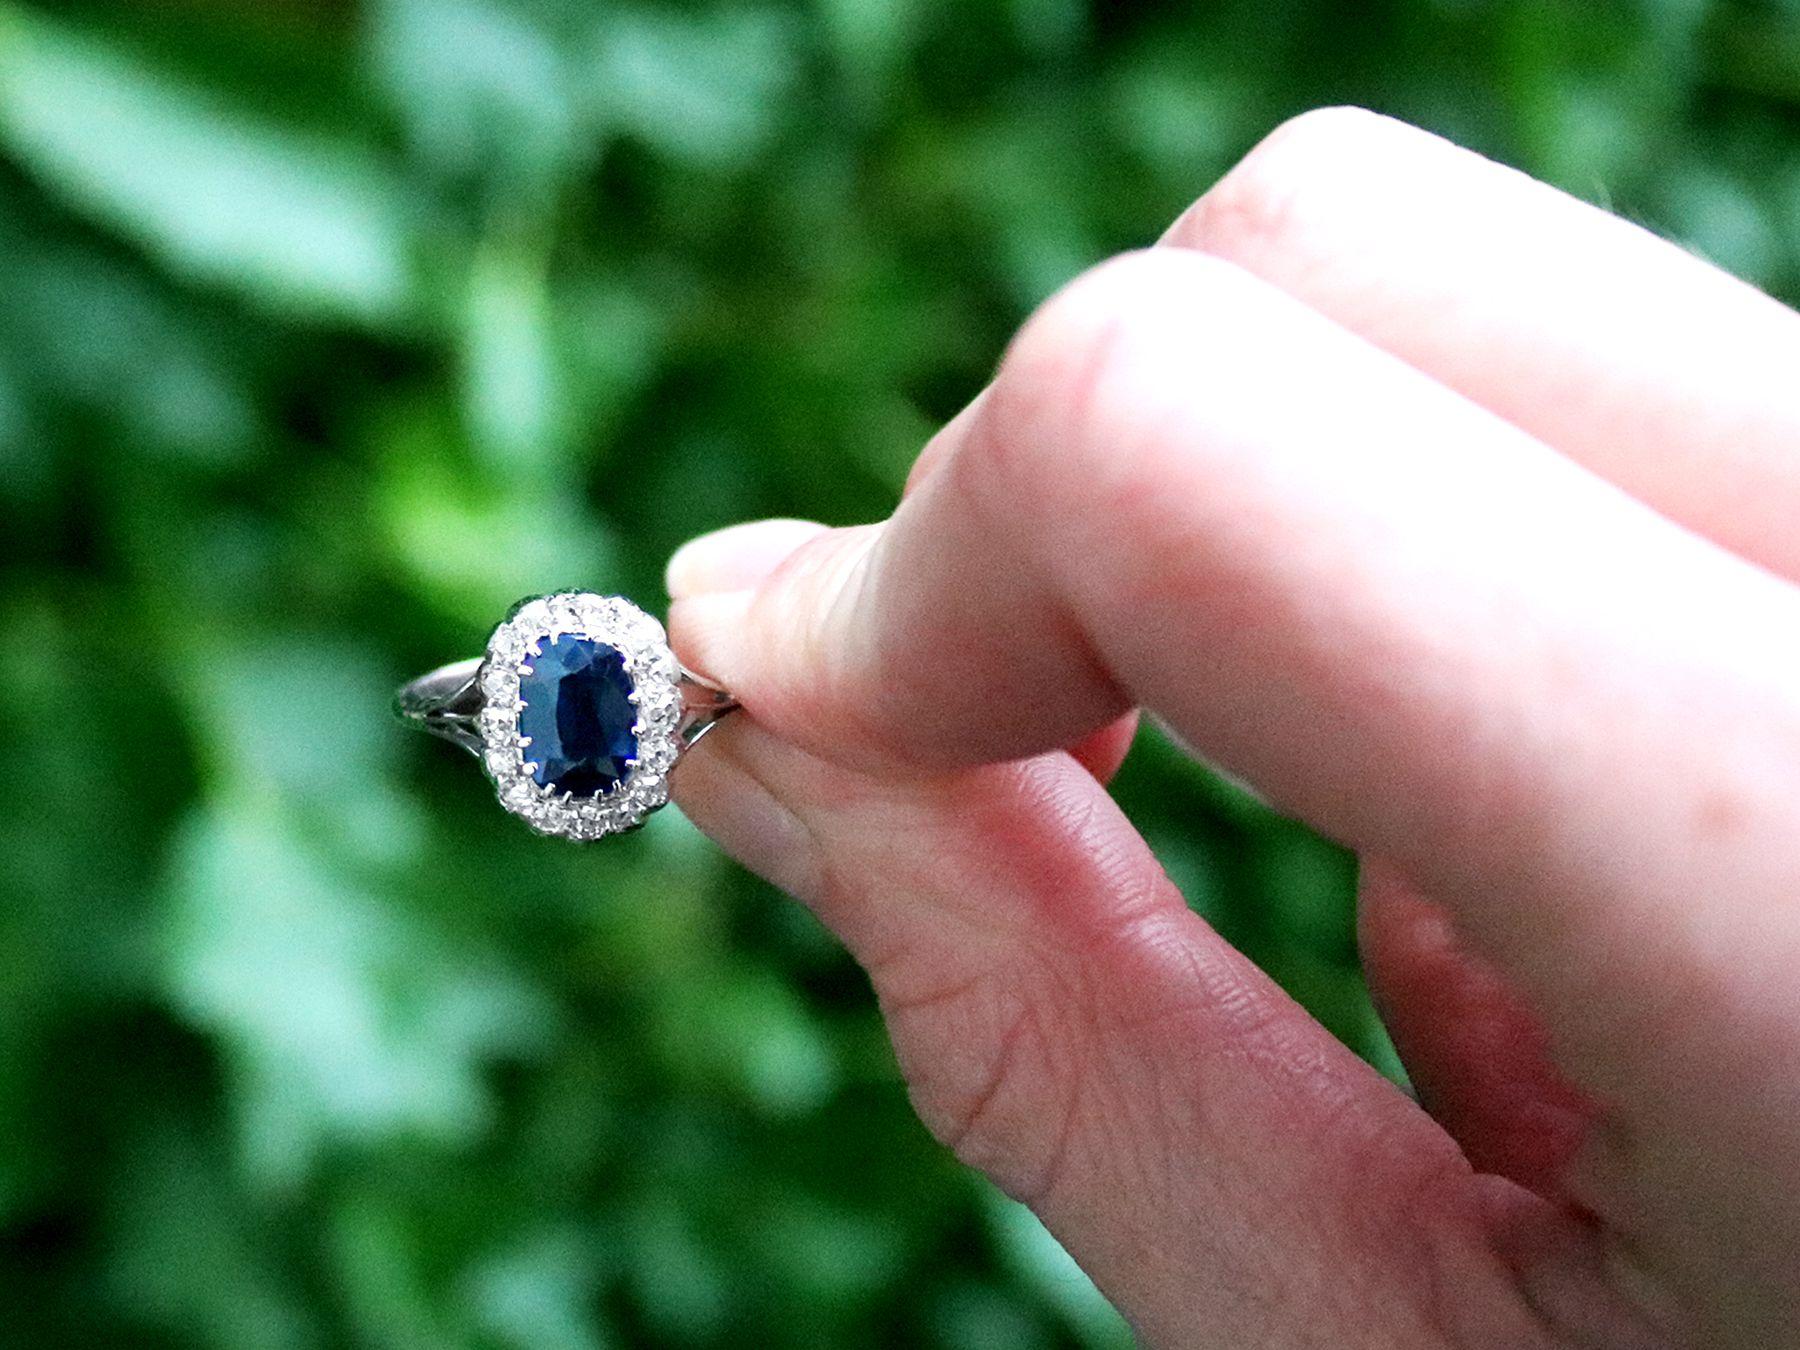 A fine and impressive antique 1.55 carat sapphire and 0.36 carat diamond, 18 karat white gold cluster style dress ring; part of our diverse antique jewelry and estate jewelry collections

This fine and impressive blue sapphire and diamond ring has